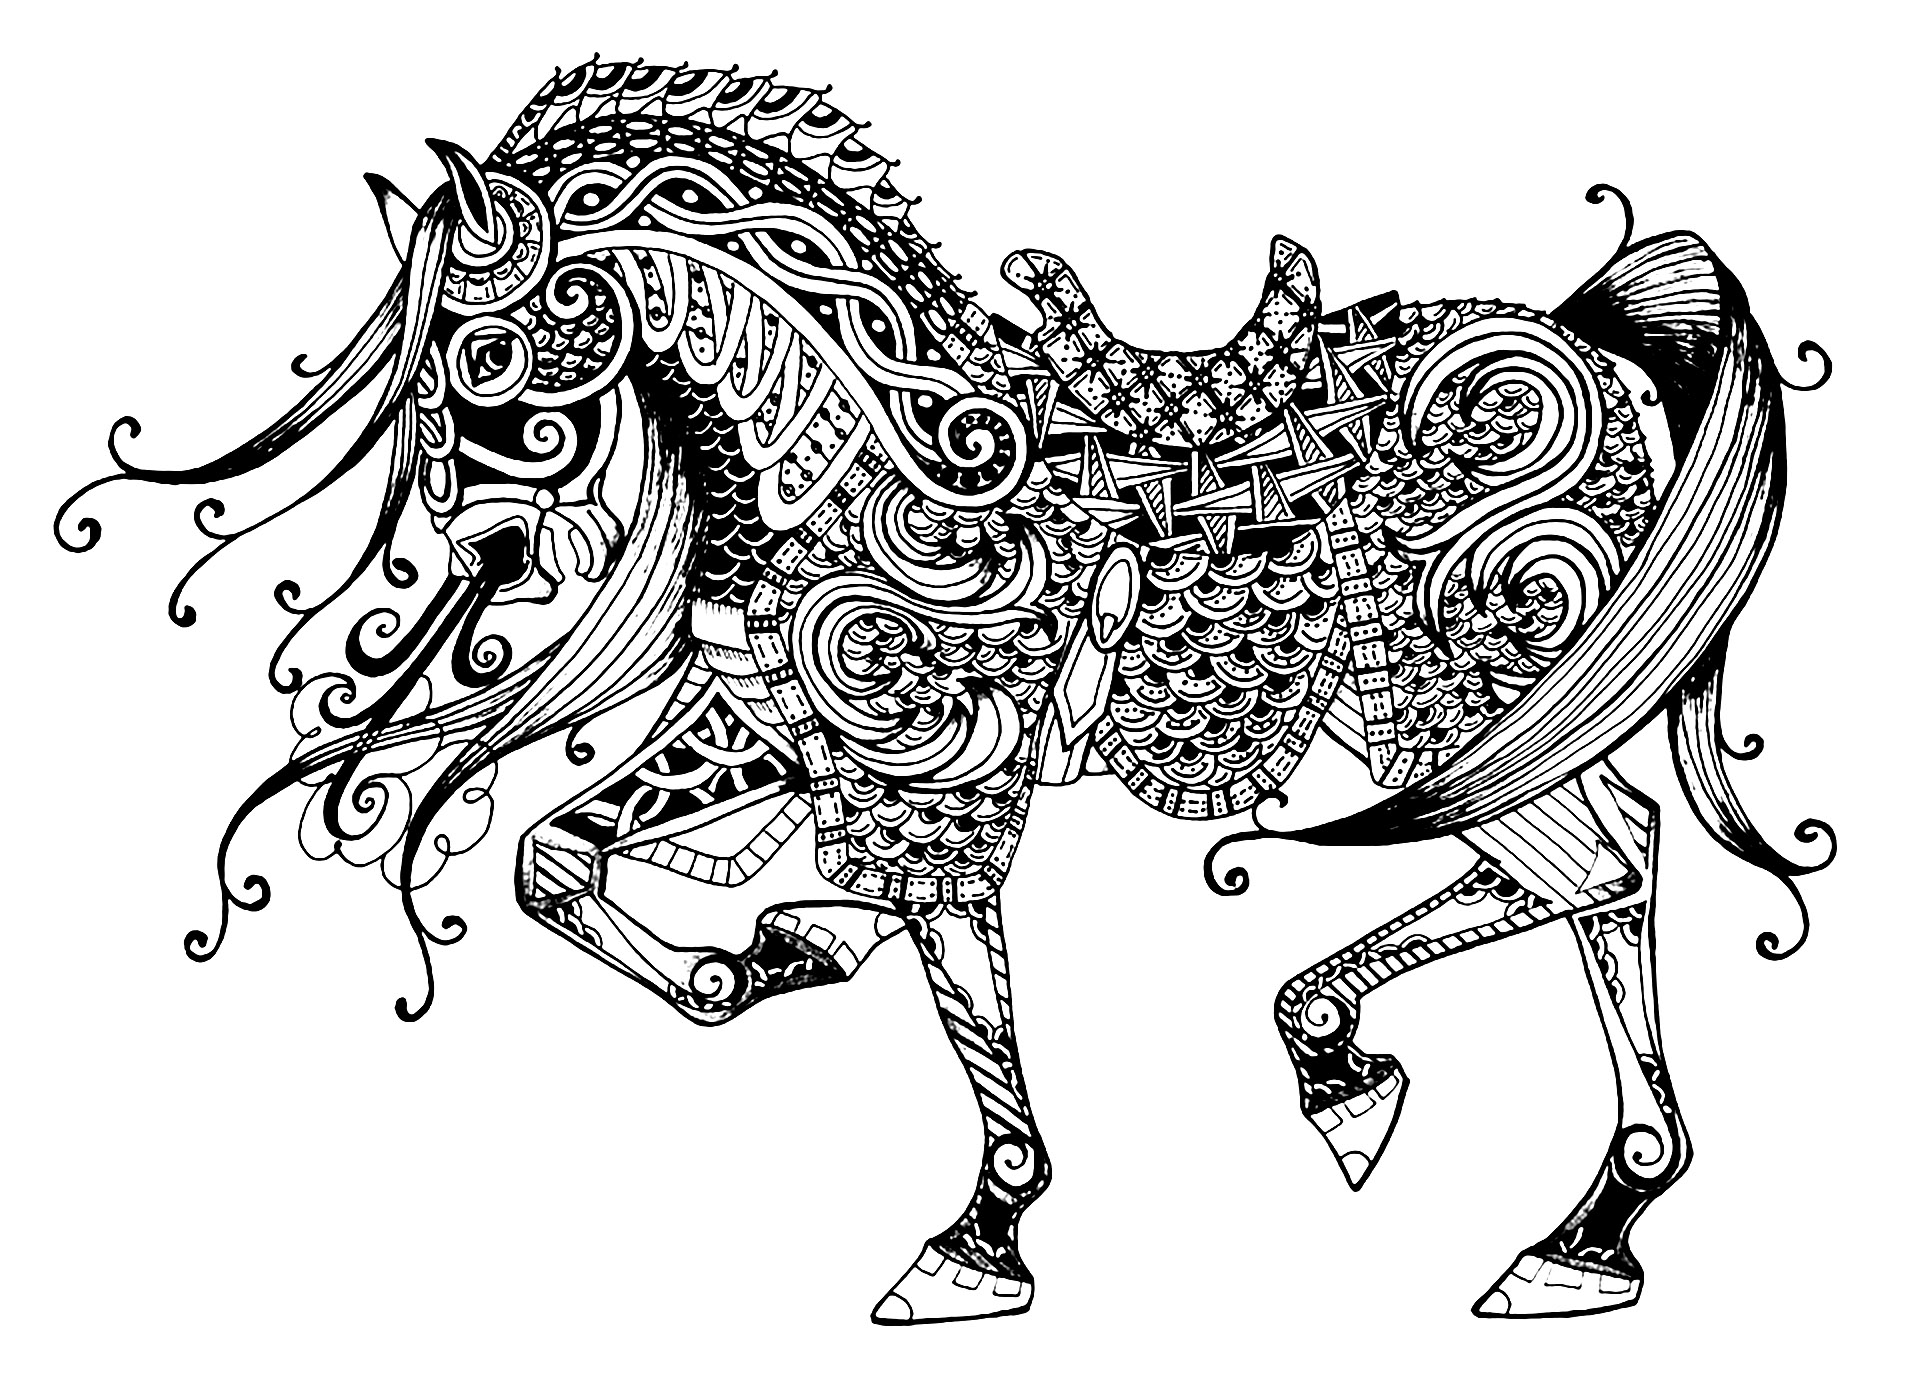 Coloring Horses To Print For Free Horses Kids Coloring Pages